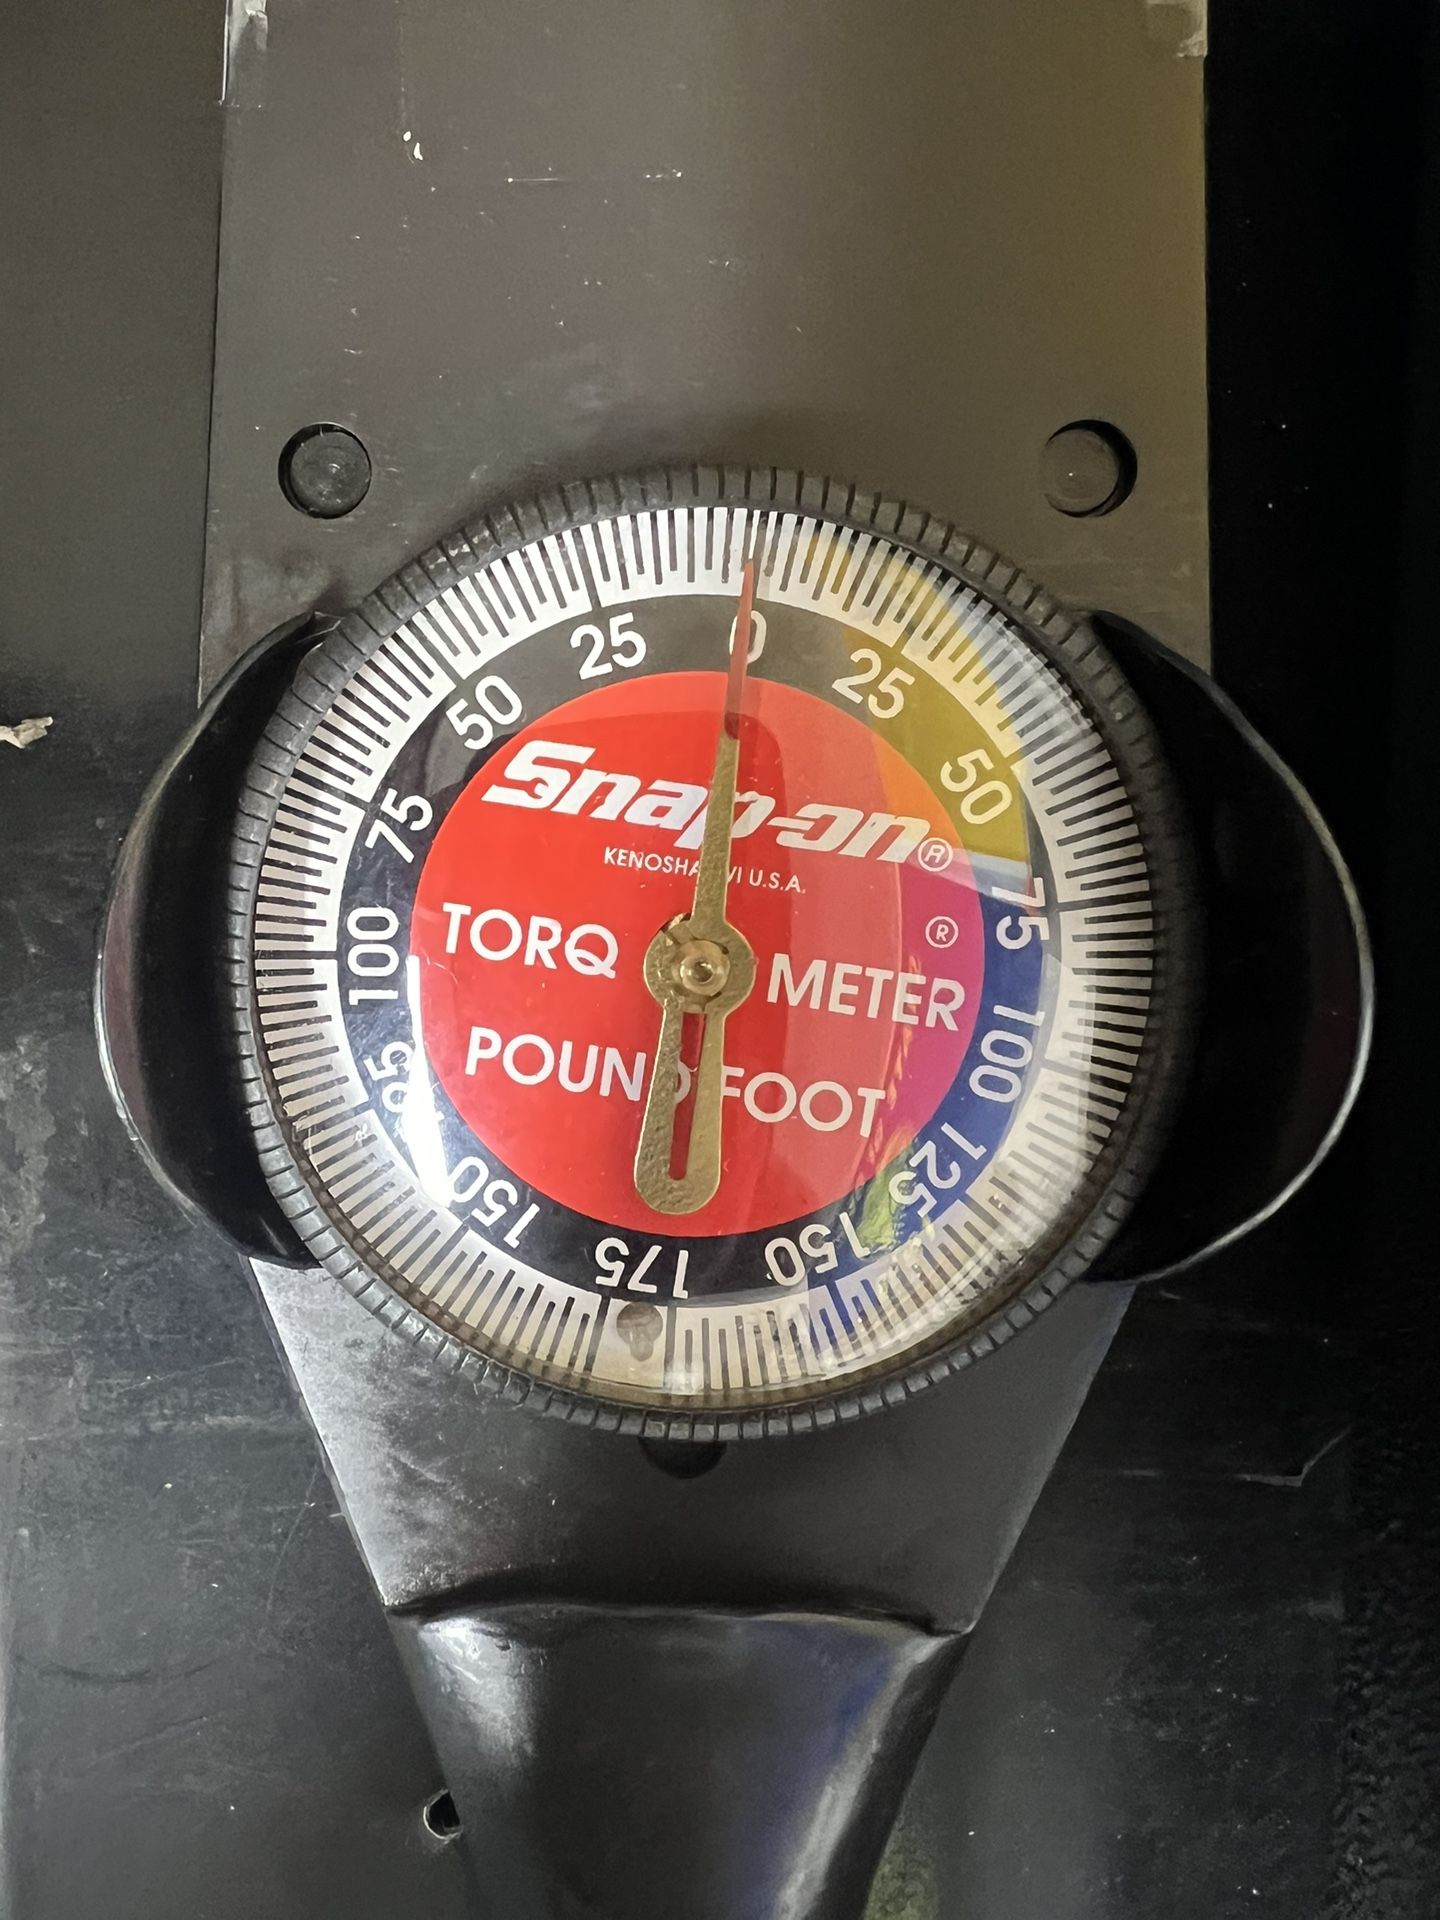 Snap On Torqometer 0-175 Ft/lb 1/2” Drive Torque Wrench